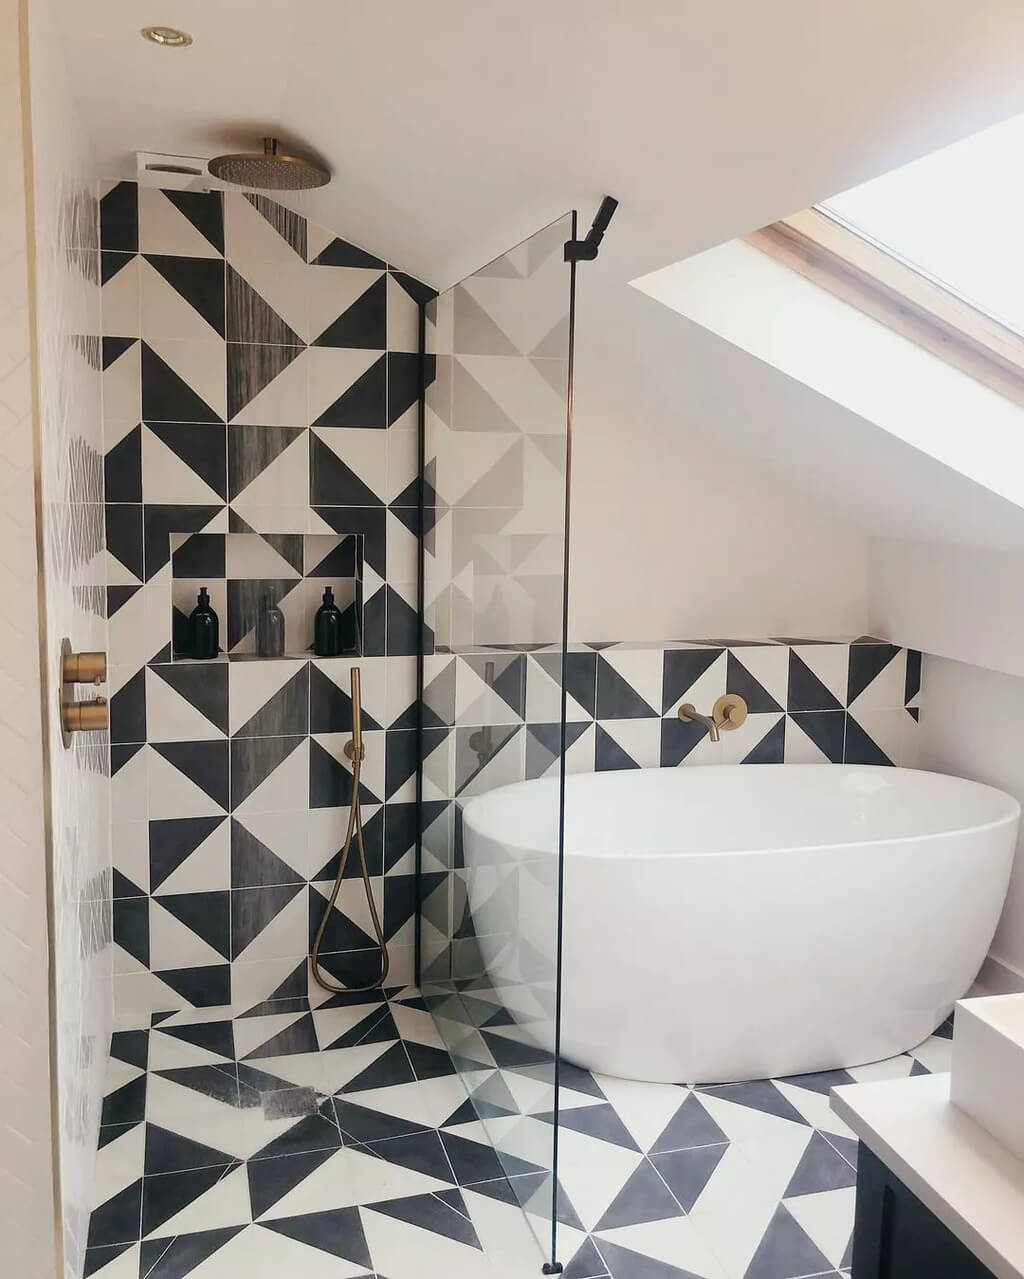 A black and white tiled bathroom with a free standing tub
